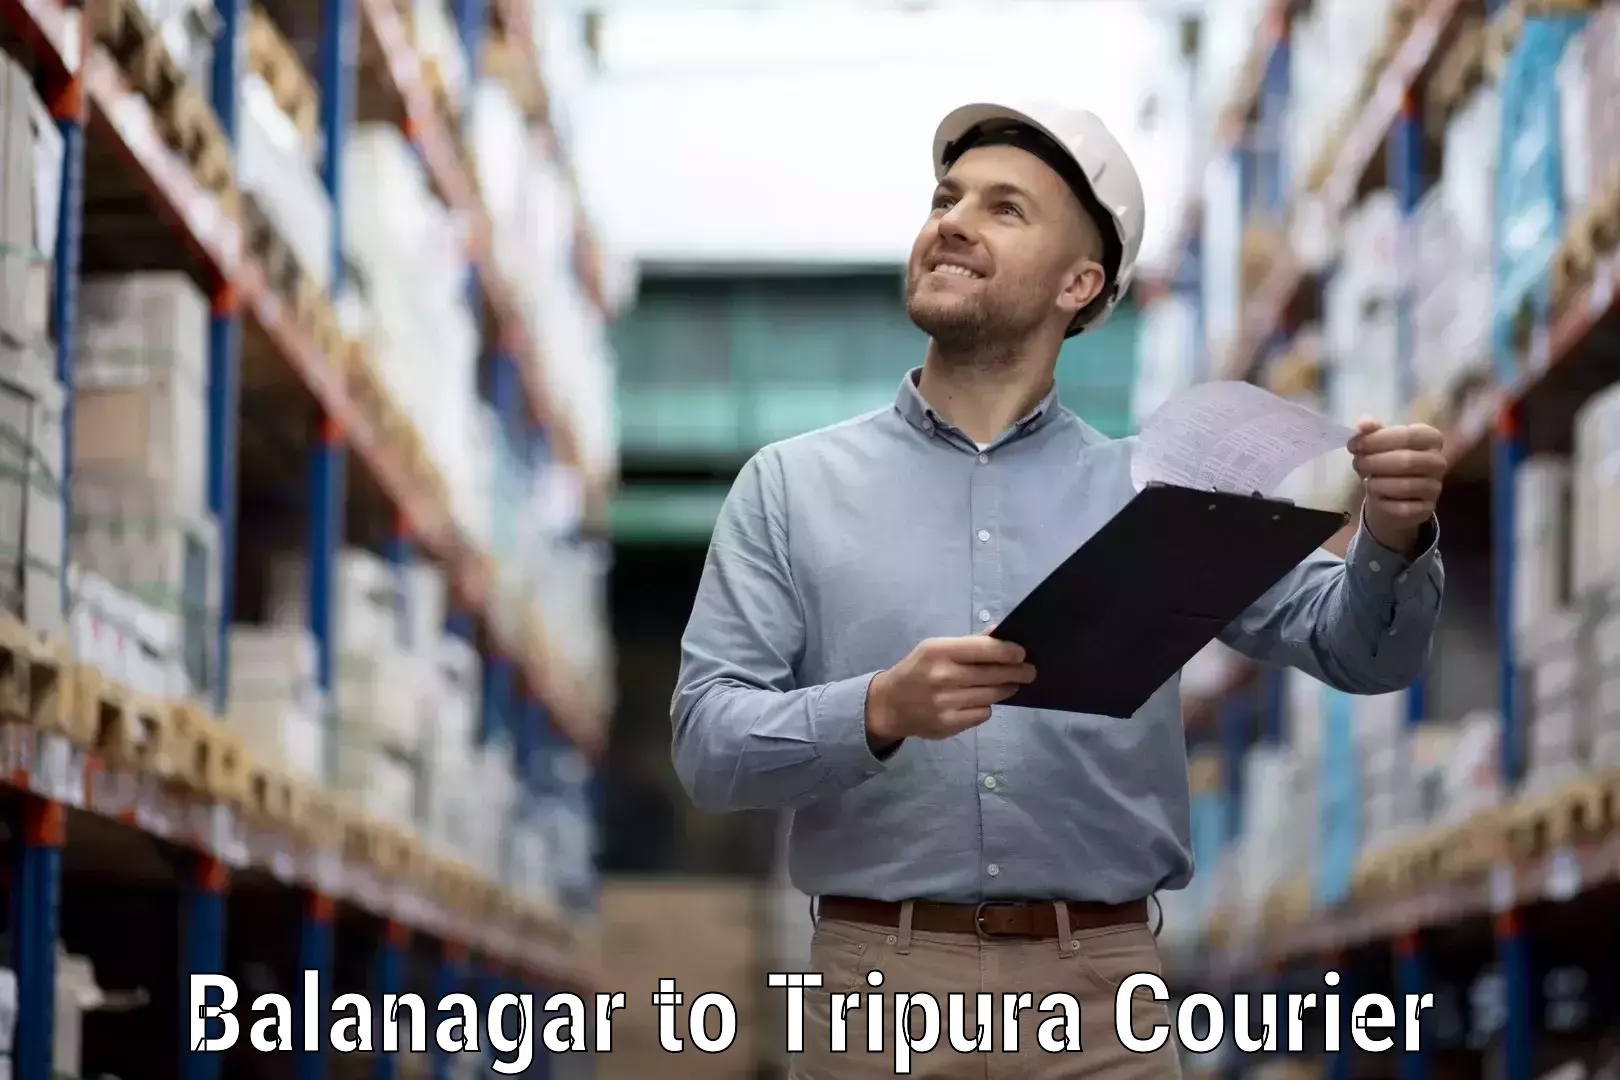 State-of-the-art courier technology Balanagar to Udaipur Tripura